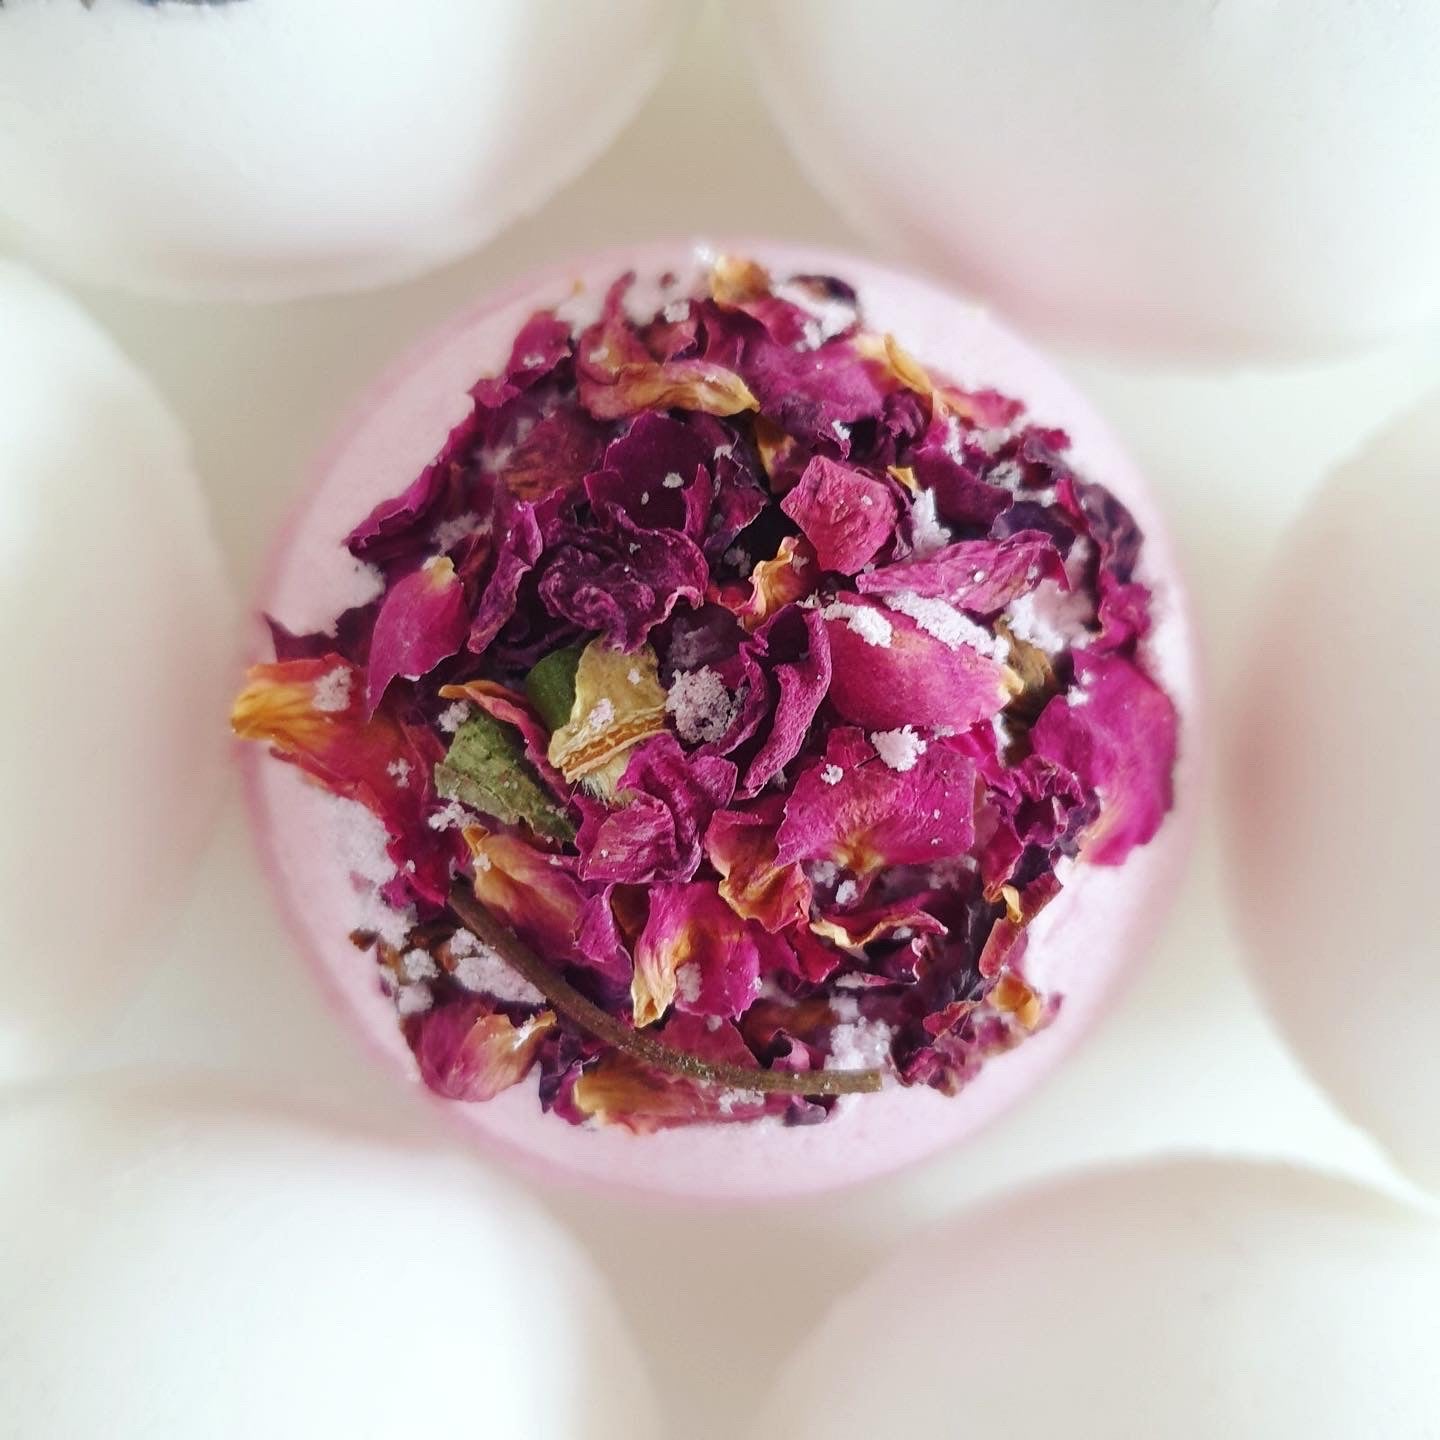 Anti-anxiety Secret Bath Bomb with vibrant pint colour thank you to beetroot powder. Scented with bergamot, lavender and ylang-ylang essential oils, decorated with dried rose petals, created by The Eden Collections. 